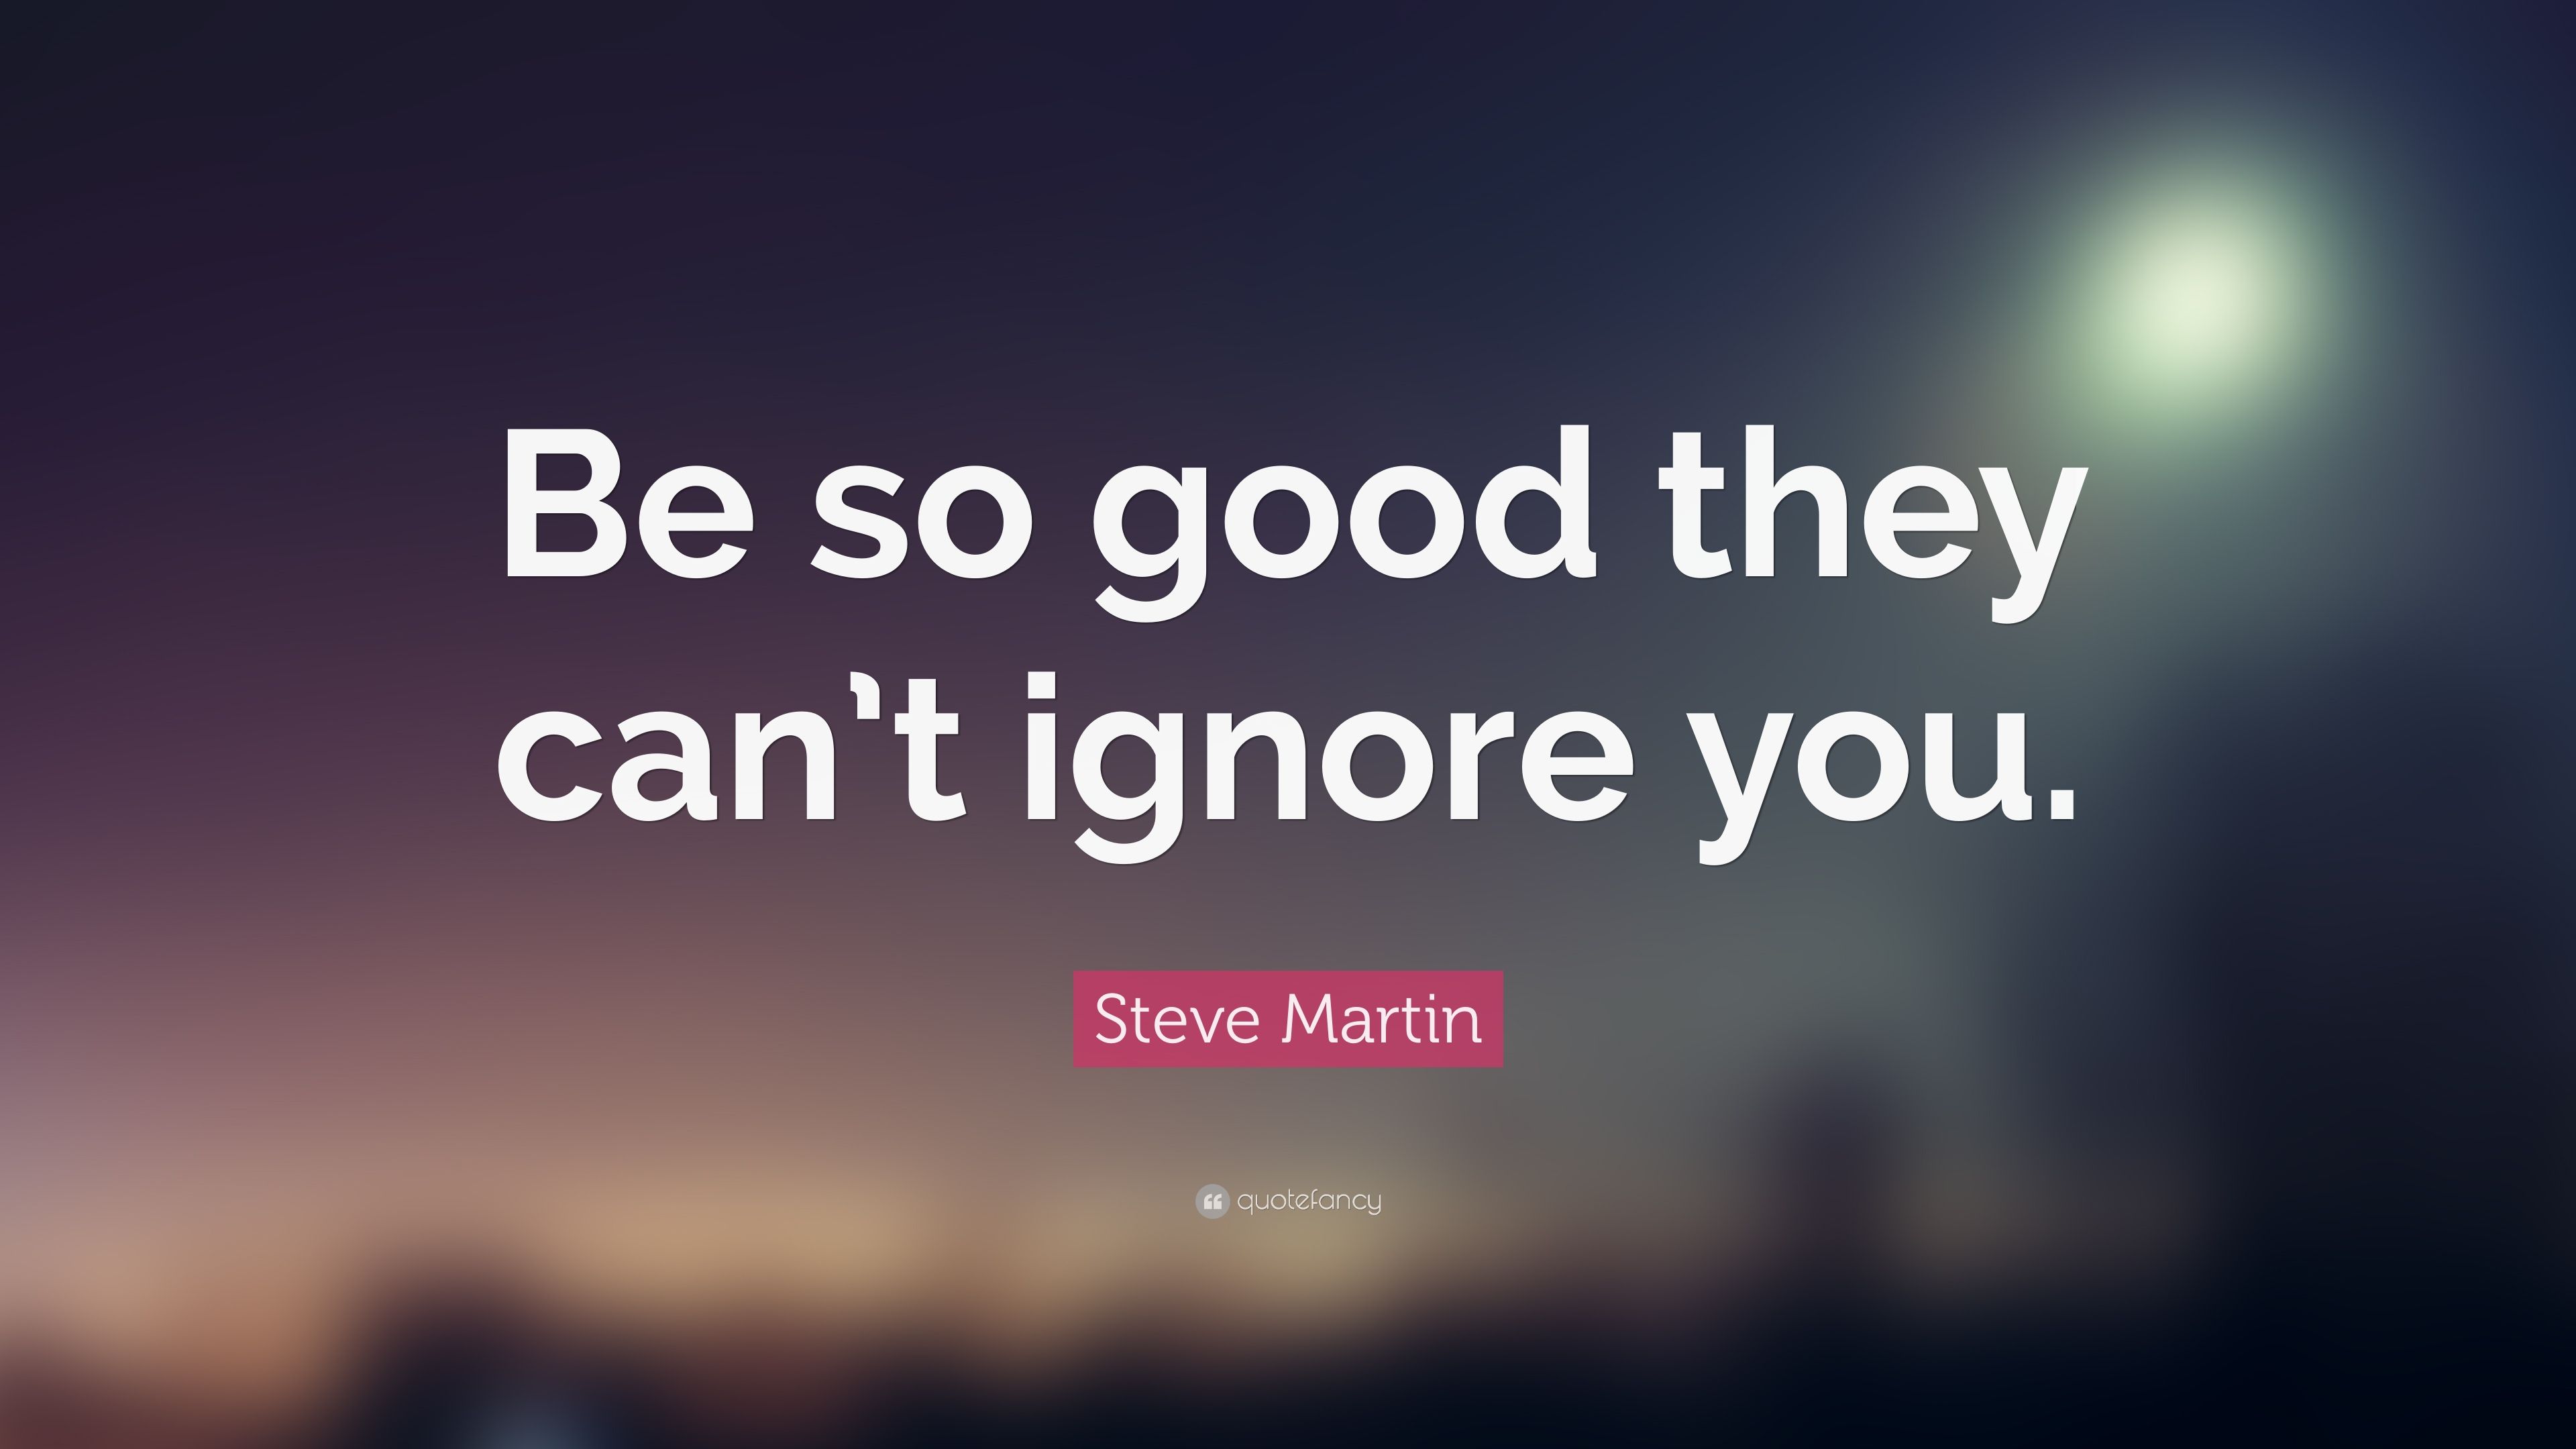 Steve Martin Quote: “Be so good they can't ignore you.” 20